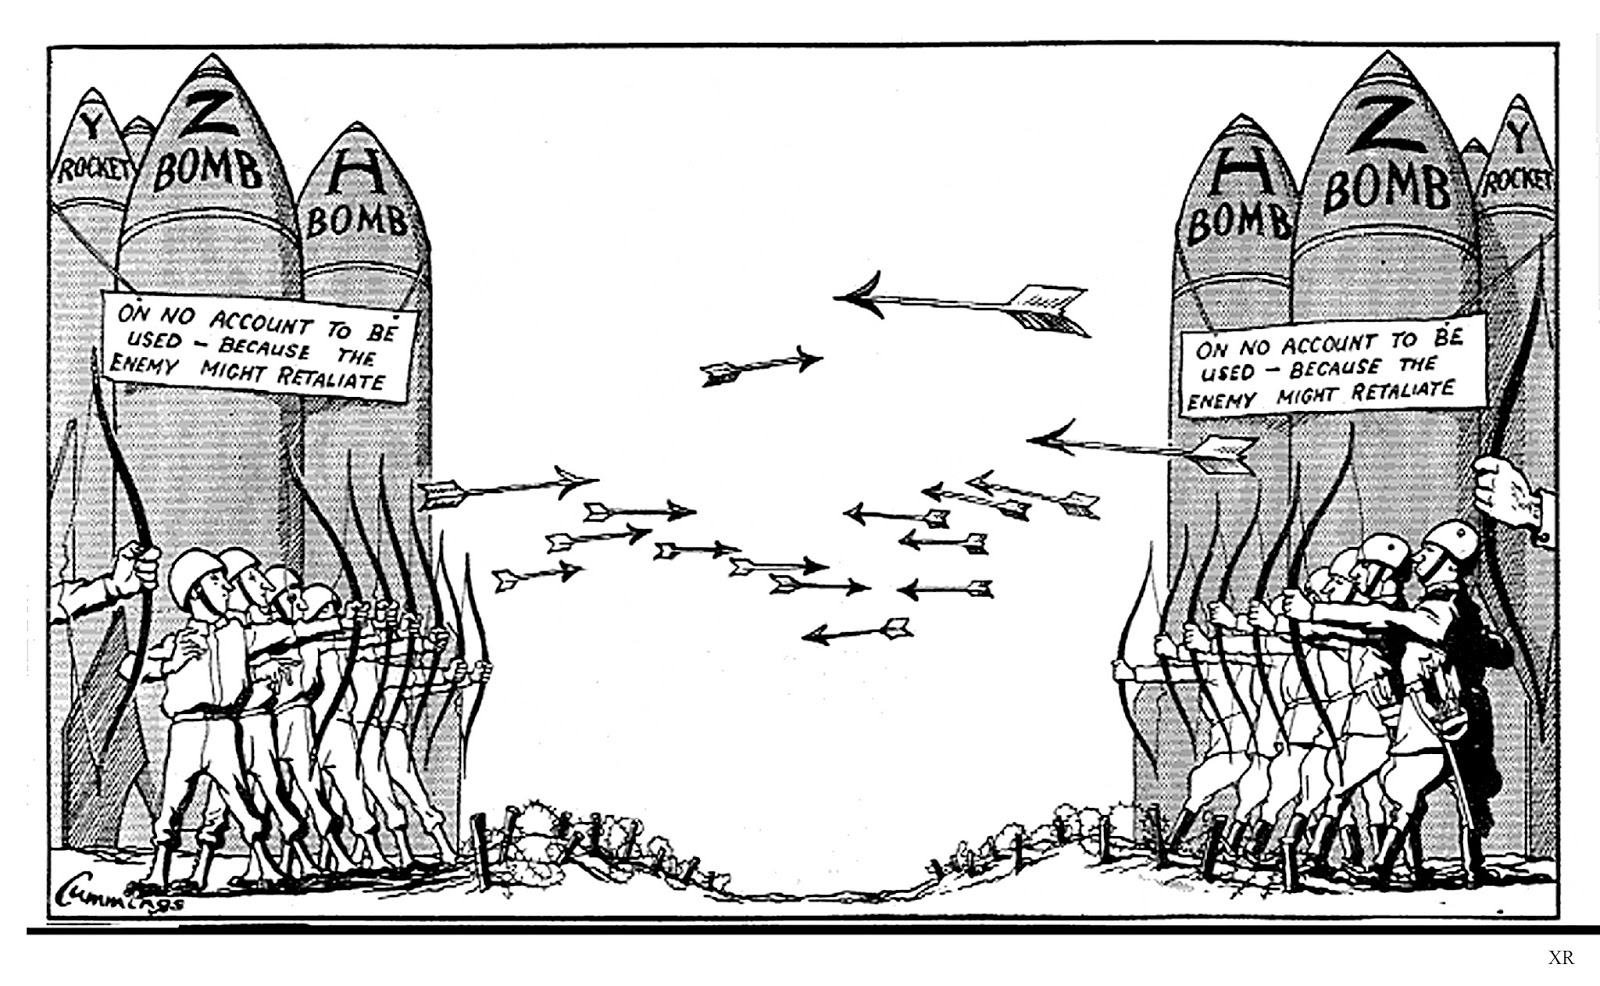 A black and white satirical drawing of the US (left) and the Soviet Union (right) shooting arrows from their bows at one another, with their nuclear weapons behind them but not using them against one another in fear or retaliation.